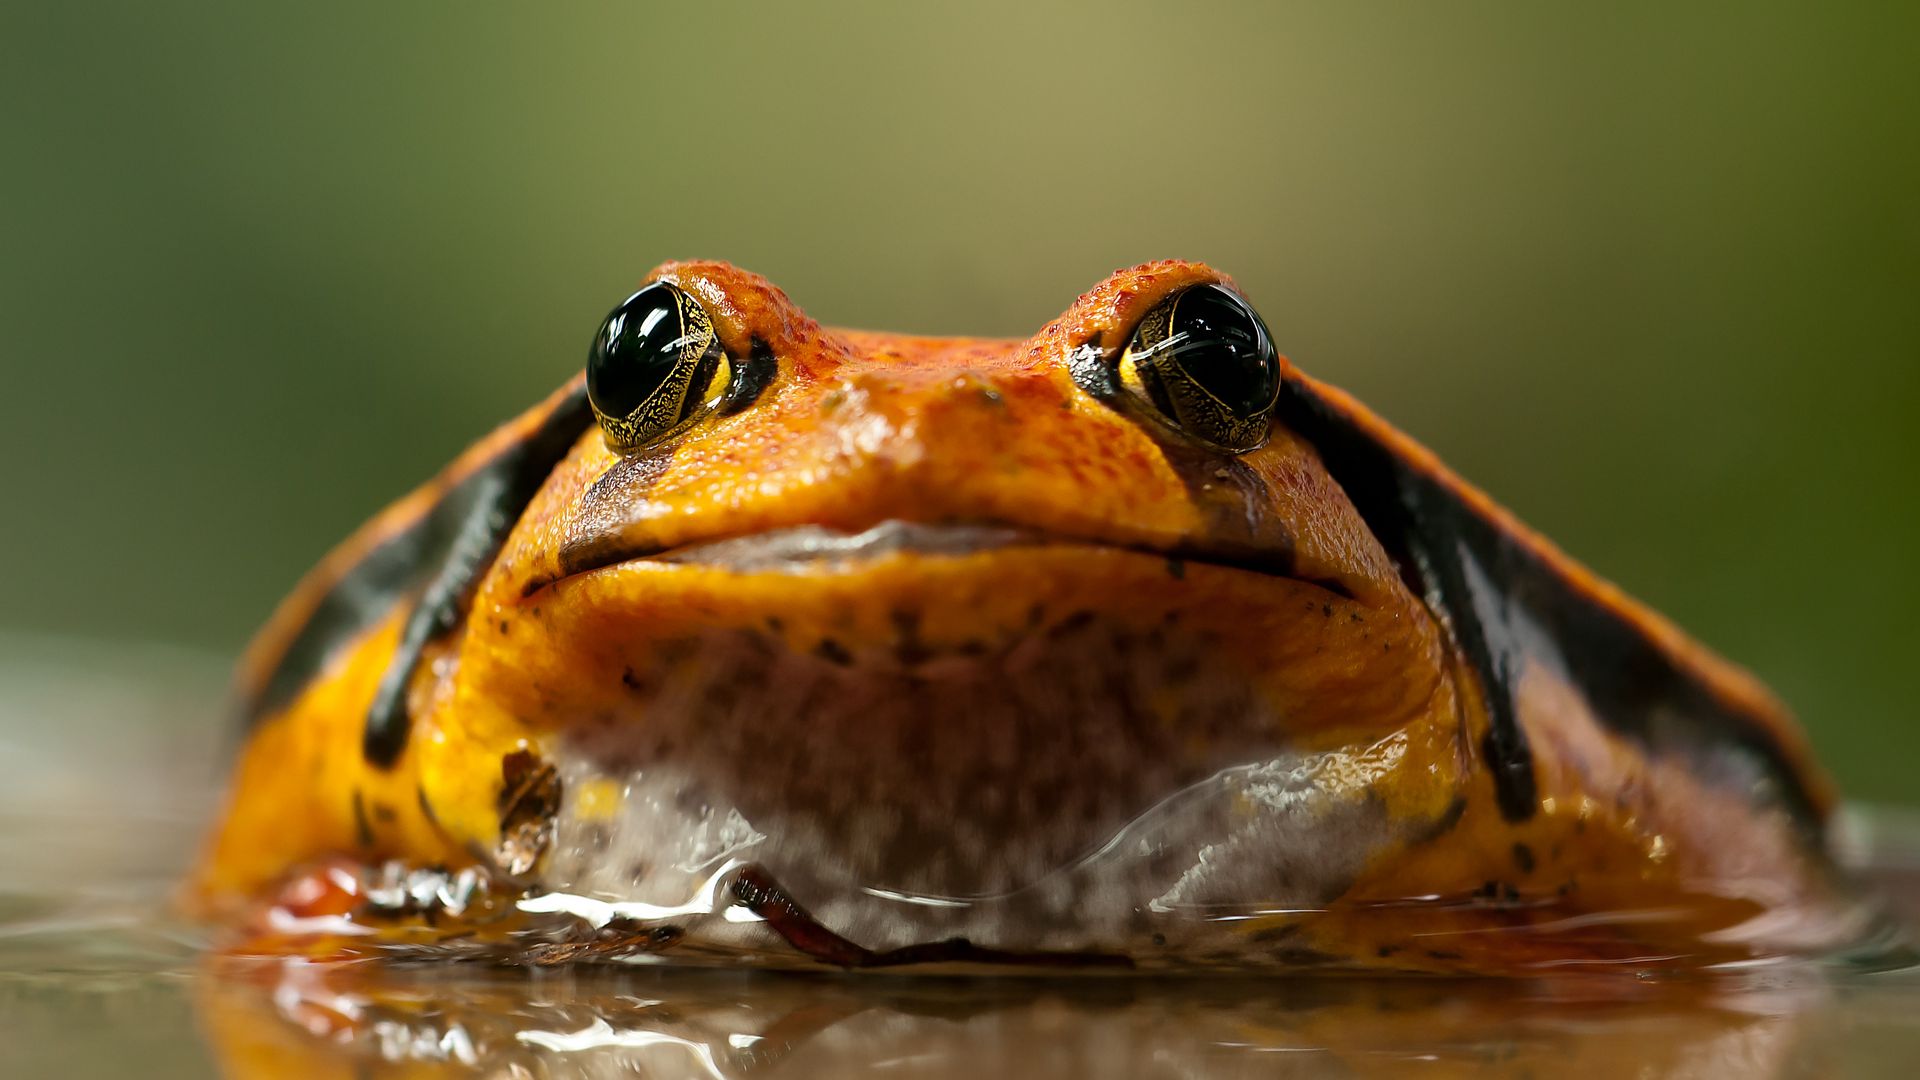 Download wallpaper 1920x1080 frog, toad, eyes full hd, hdtv, fhd, 1080p HD background